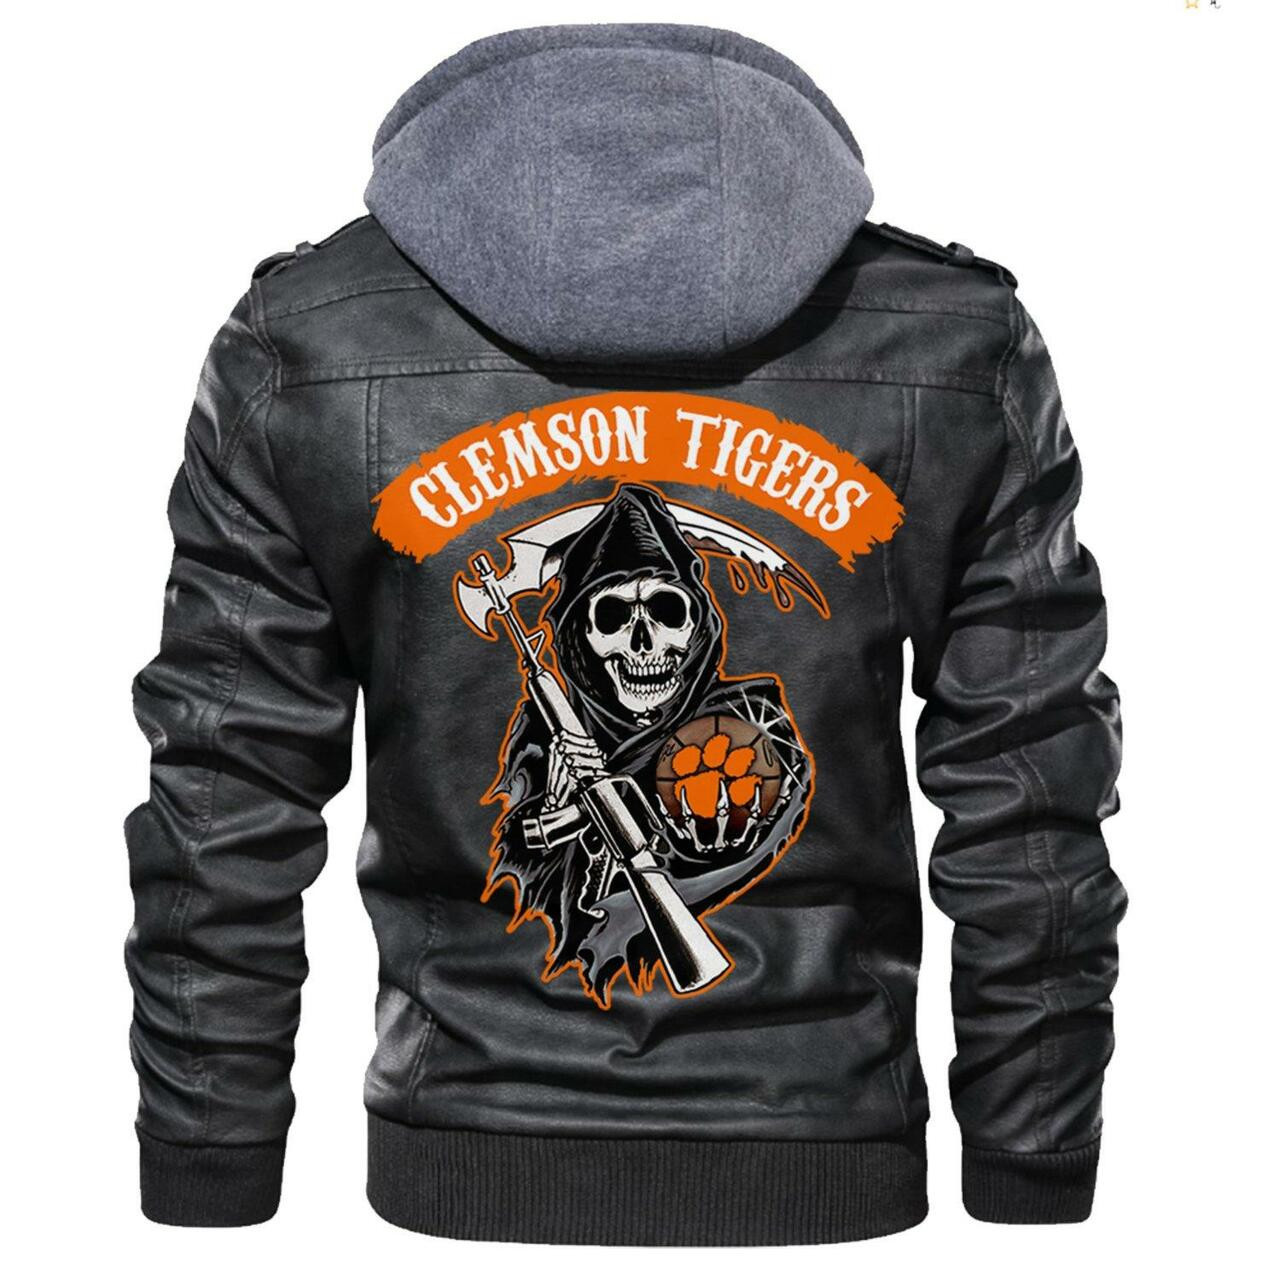 Top Beautiful Leather Jacket Fashion While Driving Word2